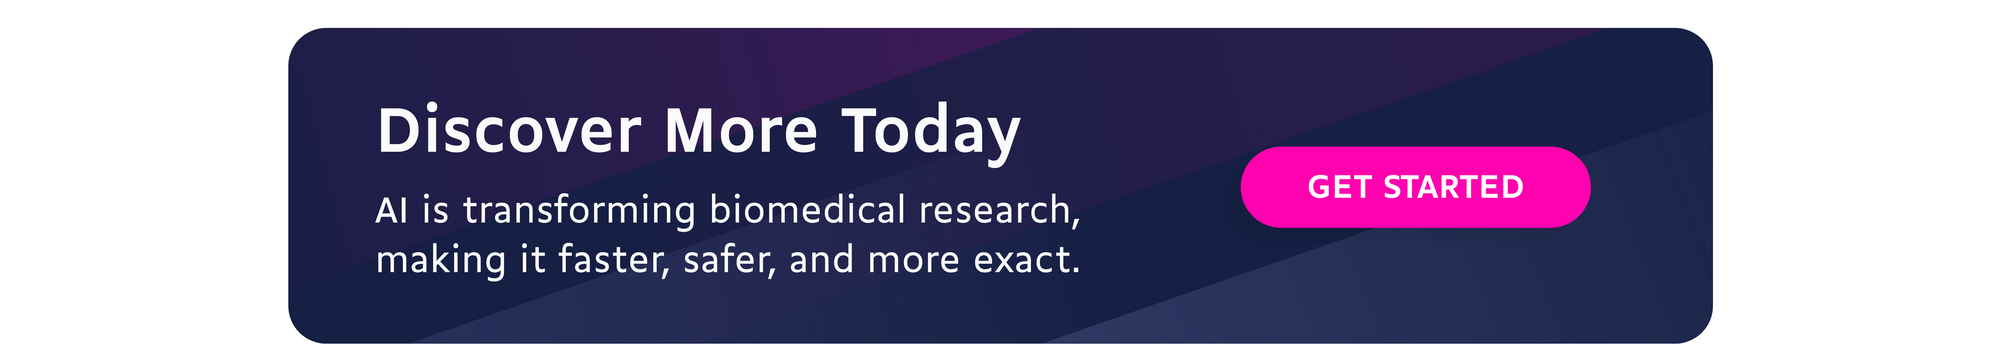 Discover more today: AI is transforming biomedical research, making it faster, safer, and more exact. Get Started